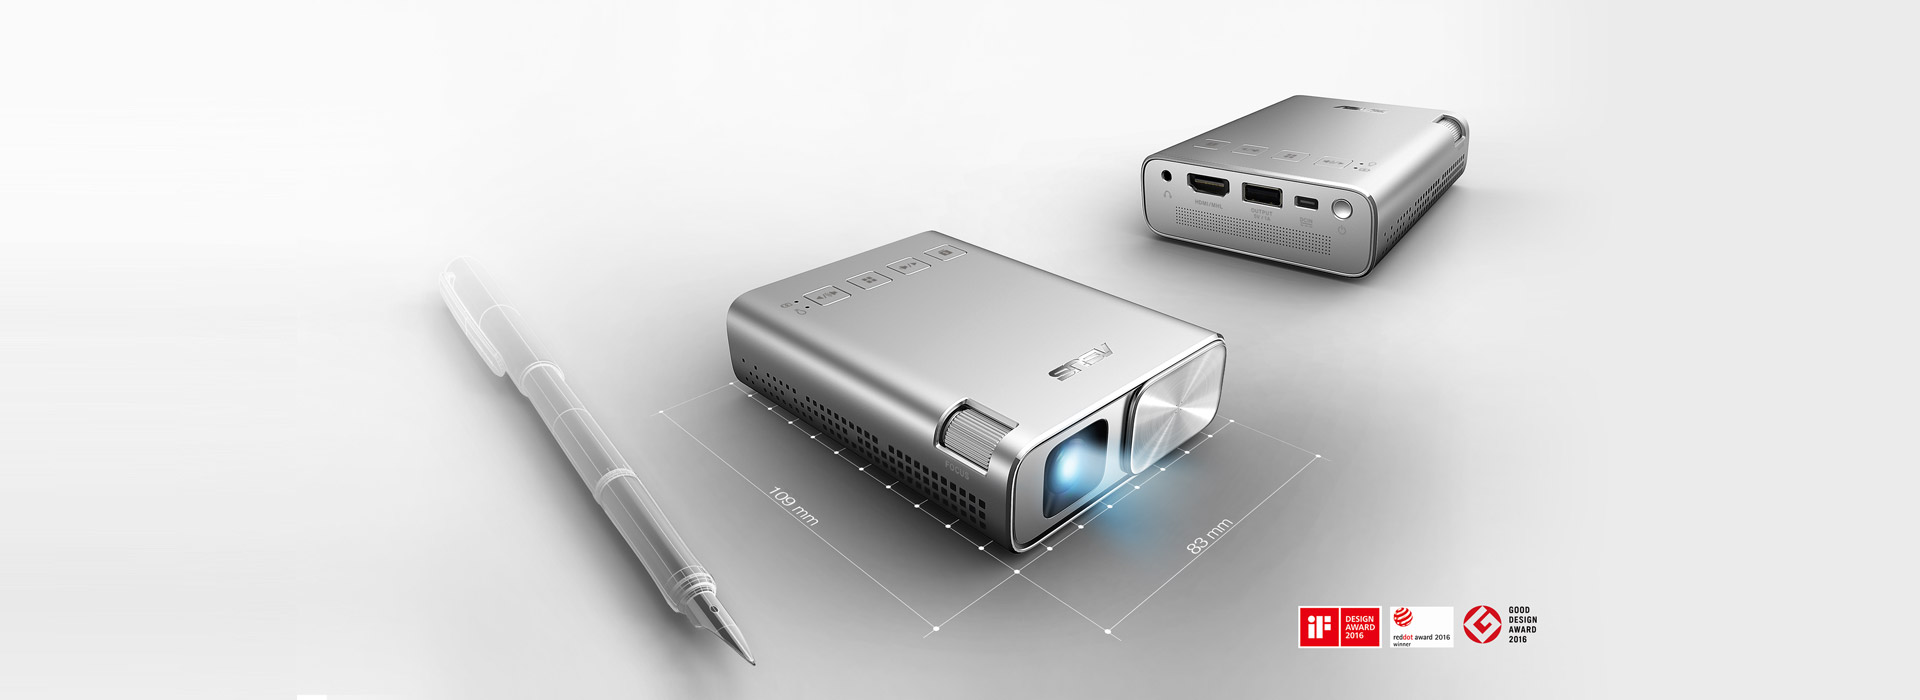 ASUS ZenBeam E1 weighs only 307g and has ultra-compact dimensions as a pen